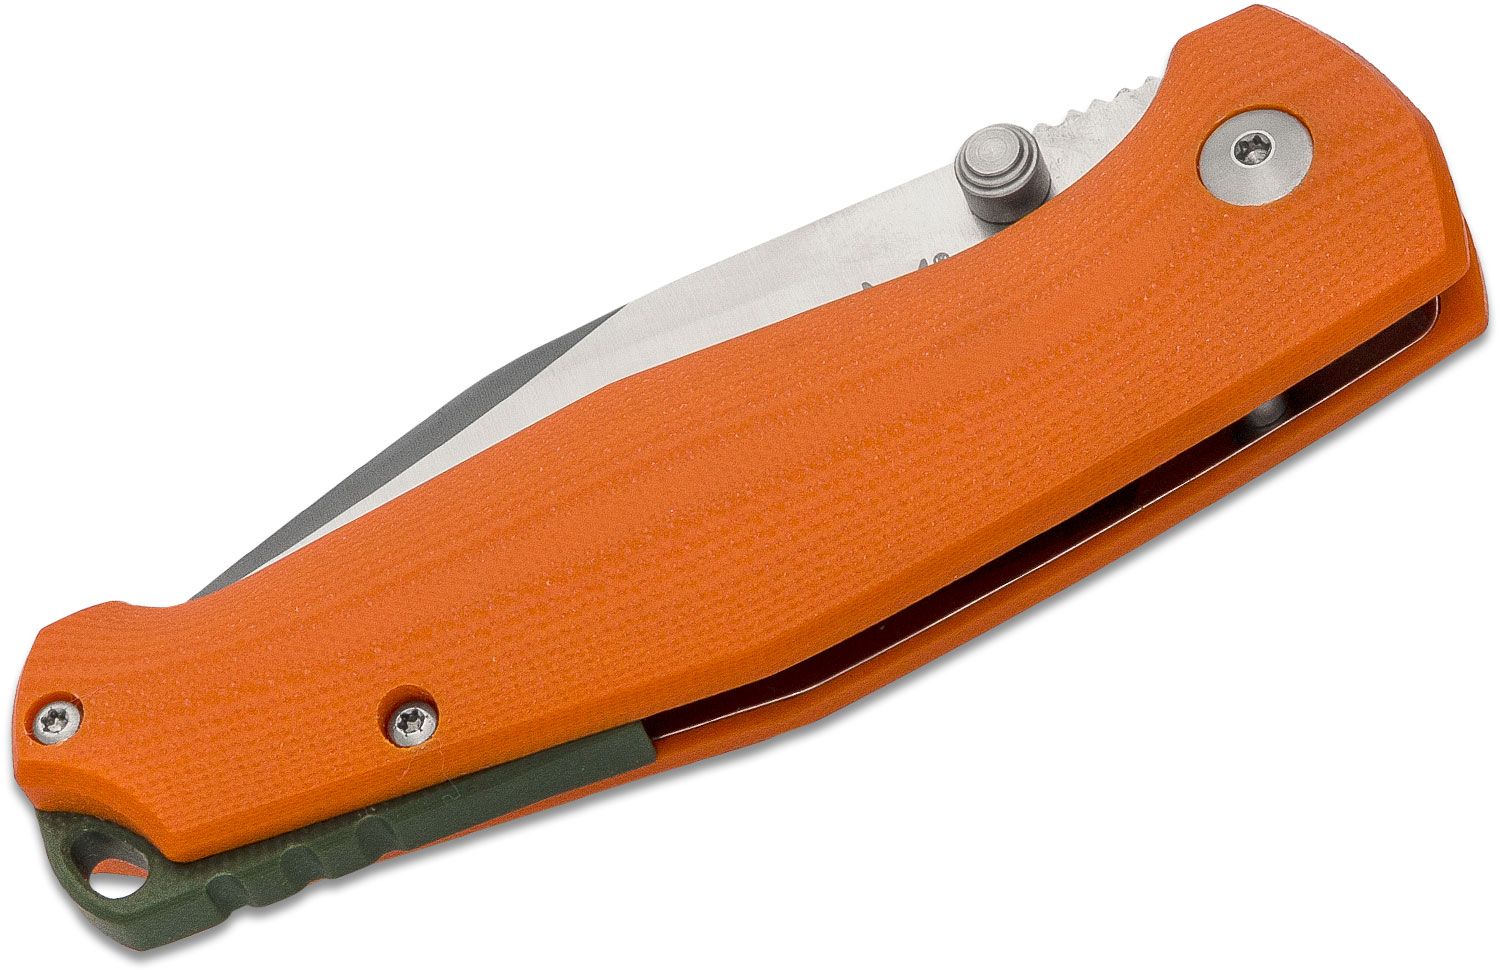 Fox Run - Grapefruit Knife Dual-Ended – The Tuscan Kitchen